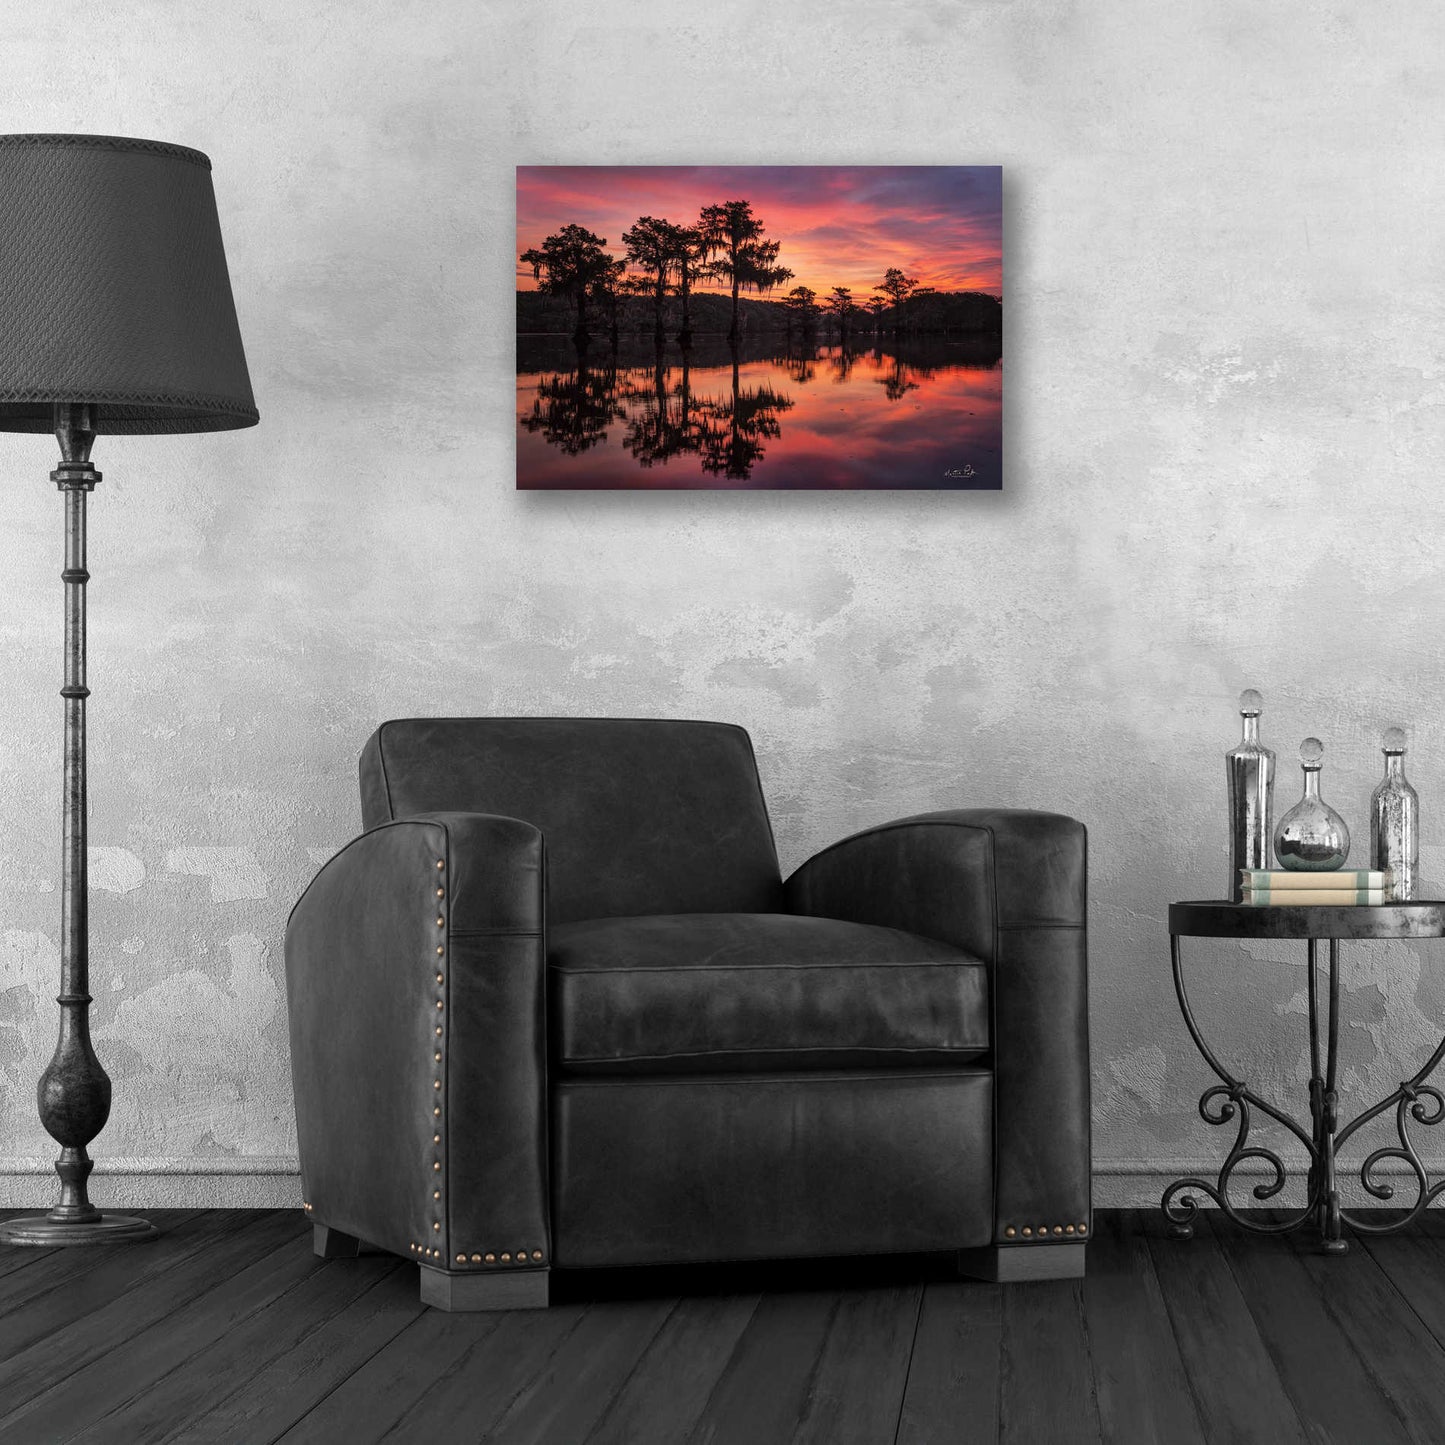 Epic Art 'Swamp on Fire' by Martin Podt, Acrylic Glass Wall Art,24x16